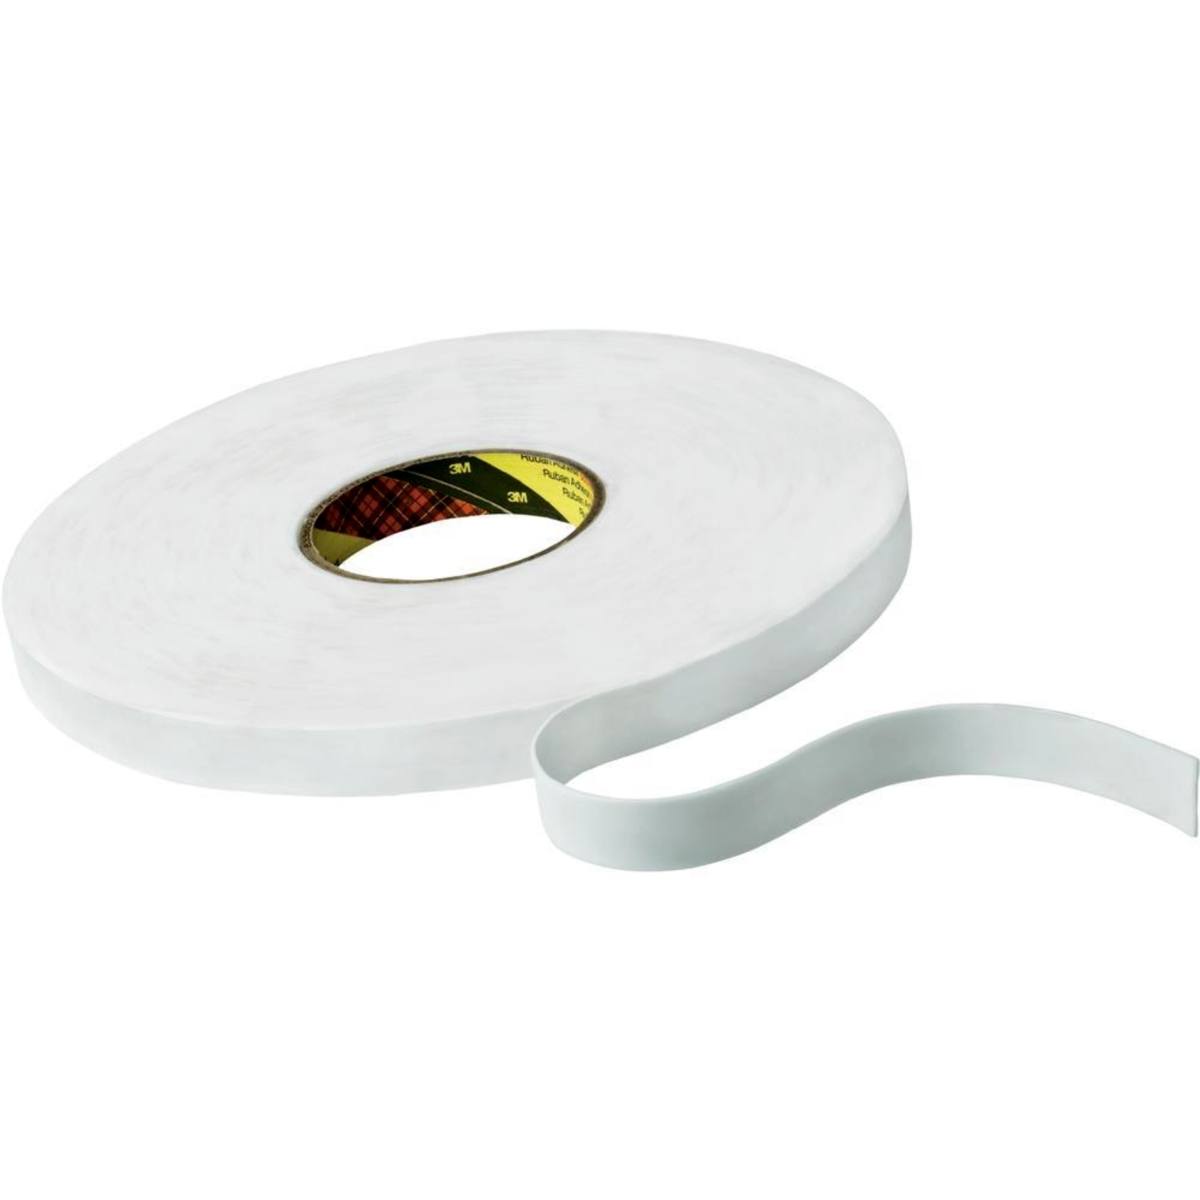 3M PE foam adhesive tape with rubber-resin adhesive 9528, white, 19 mm x 66 m, 0.8 mm